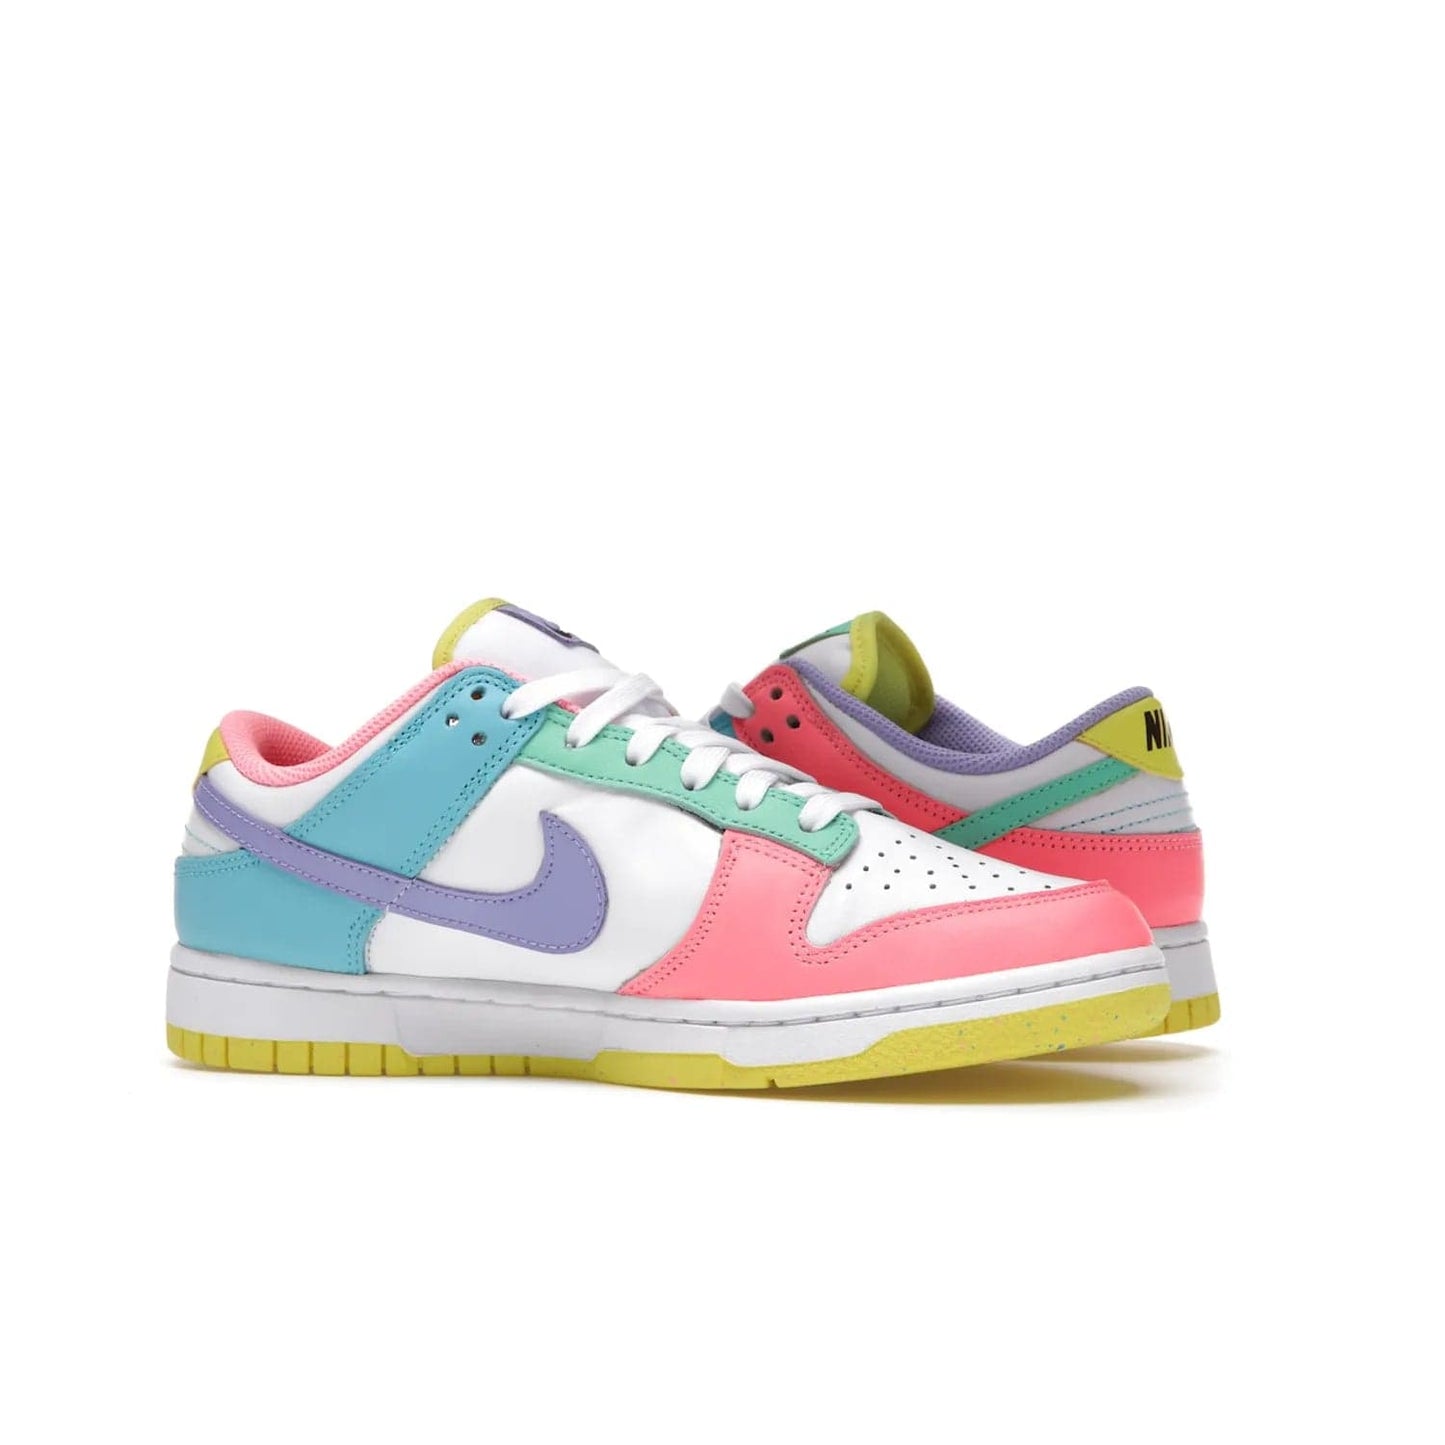 Nike Dunk Low SE Easter Candy (Women's) - Image 21 - Only at www.BallersClubKickz.com - UP
The Nike Dunk Low SE Easter Candy (Women's) brings a stylish touch to any outfit with its white leather upper, colorful accents, and multicolor speckle detailing. Shop now before they're gone.